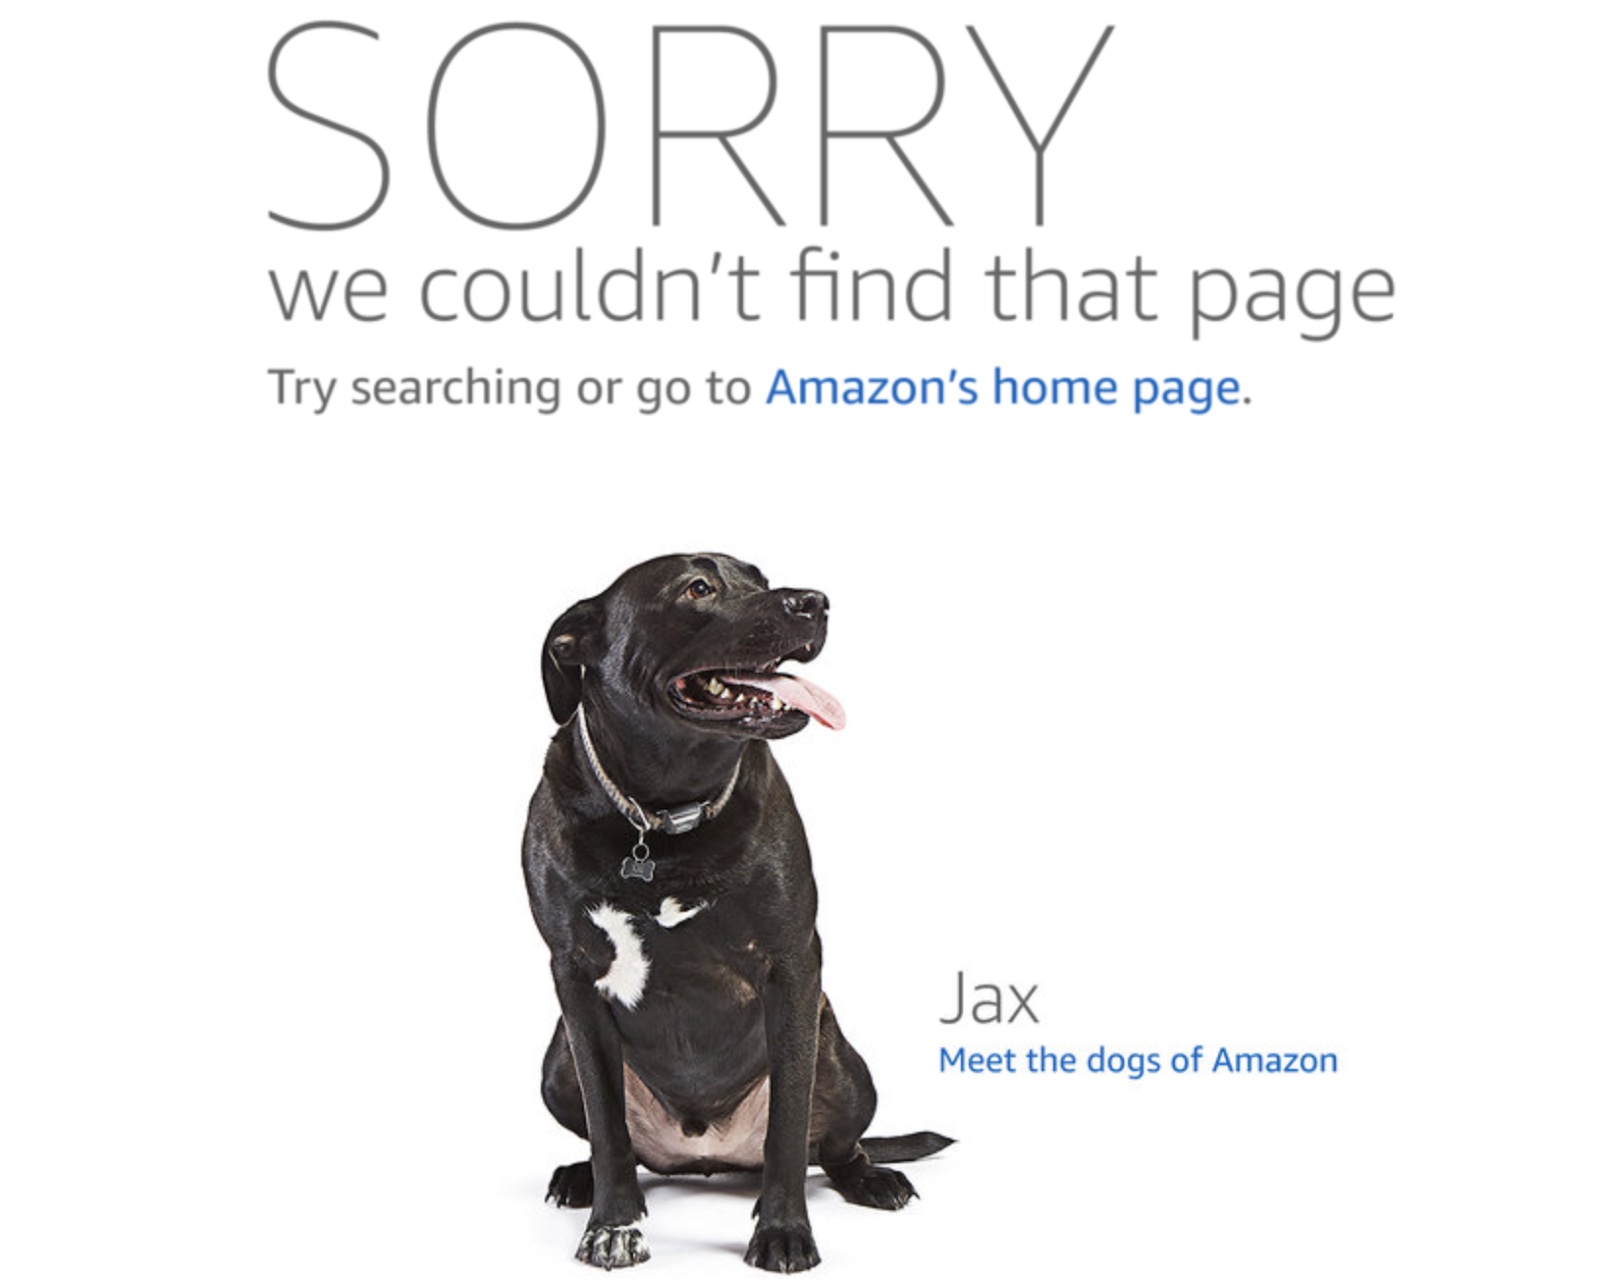 Amazon's 404 error page that reads "Sorry we couldn't find that page. Try searching or go to Amazon's home page." with an image of a dog